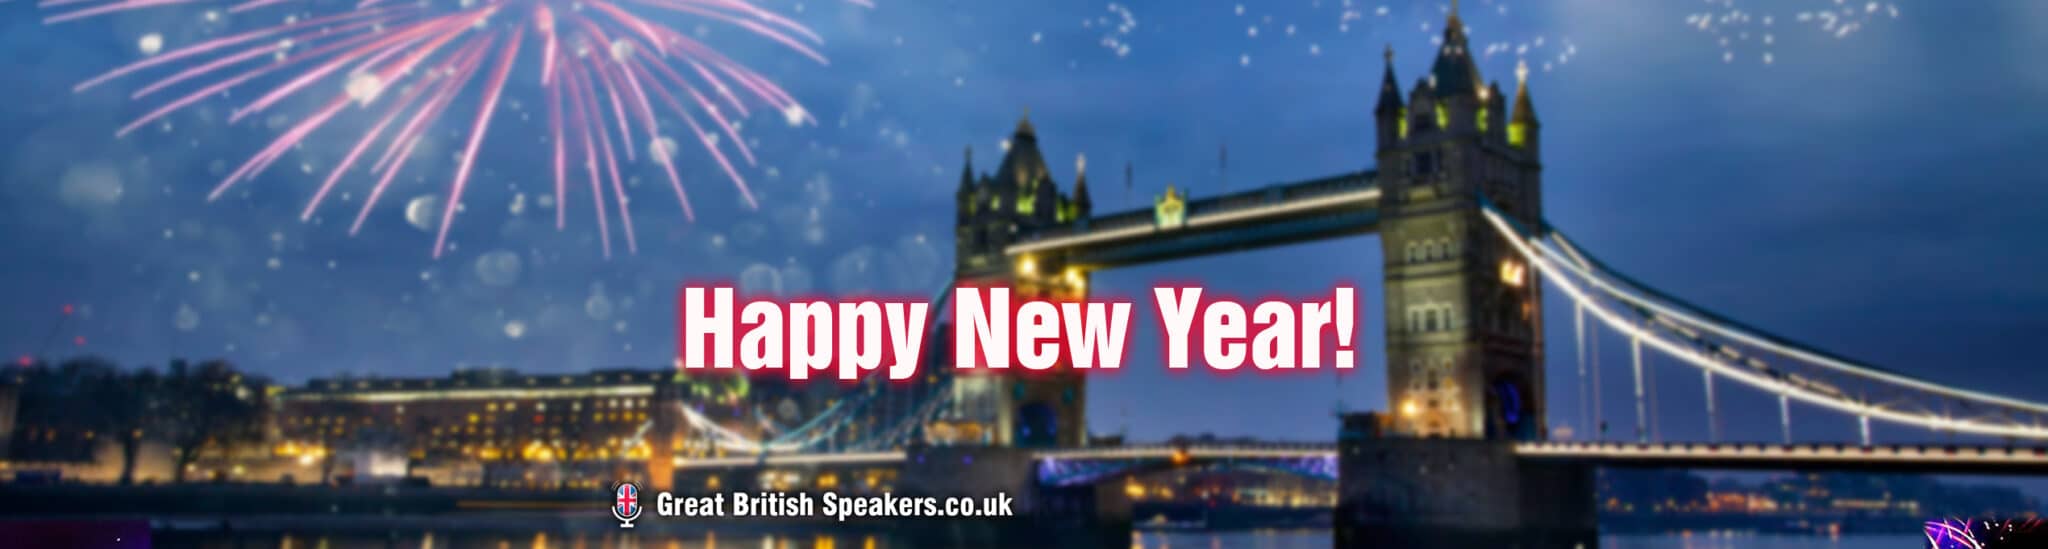 Happy New Year from Great British Speakers